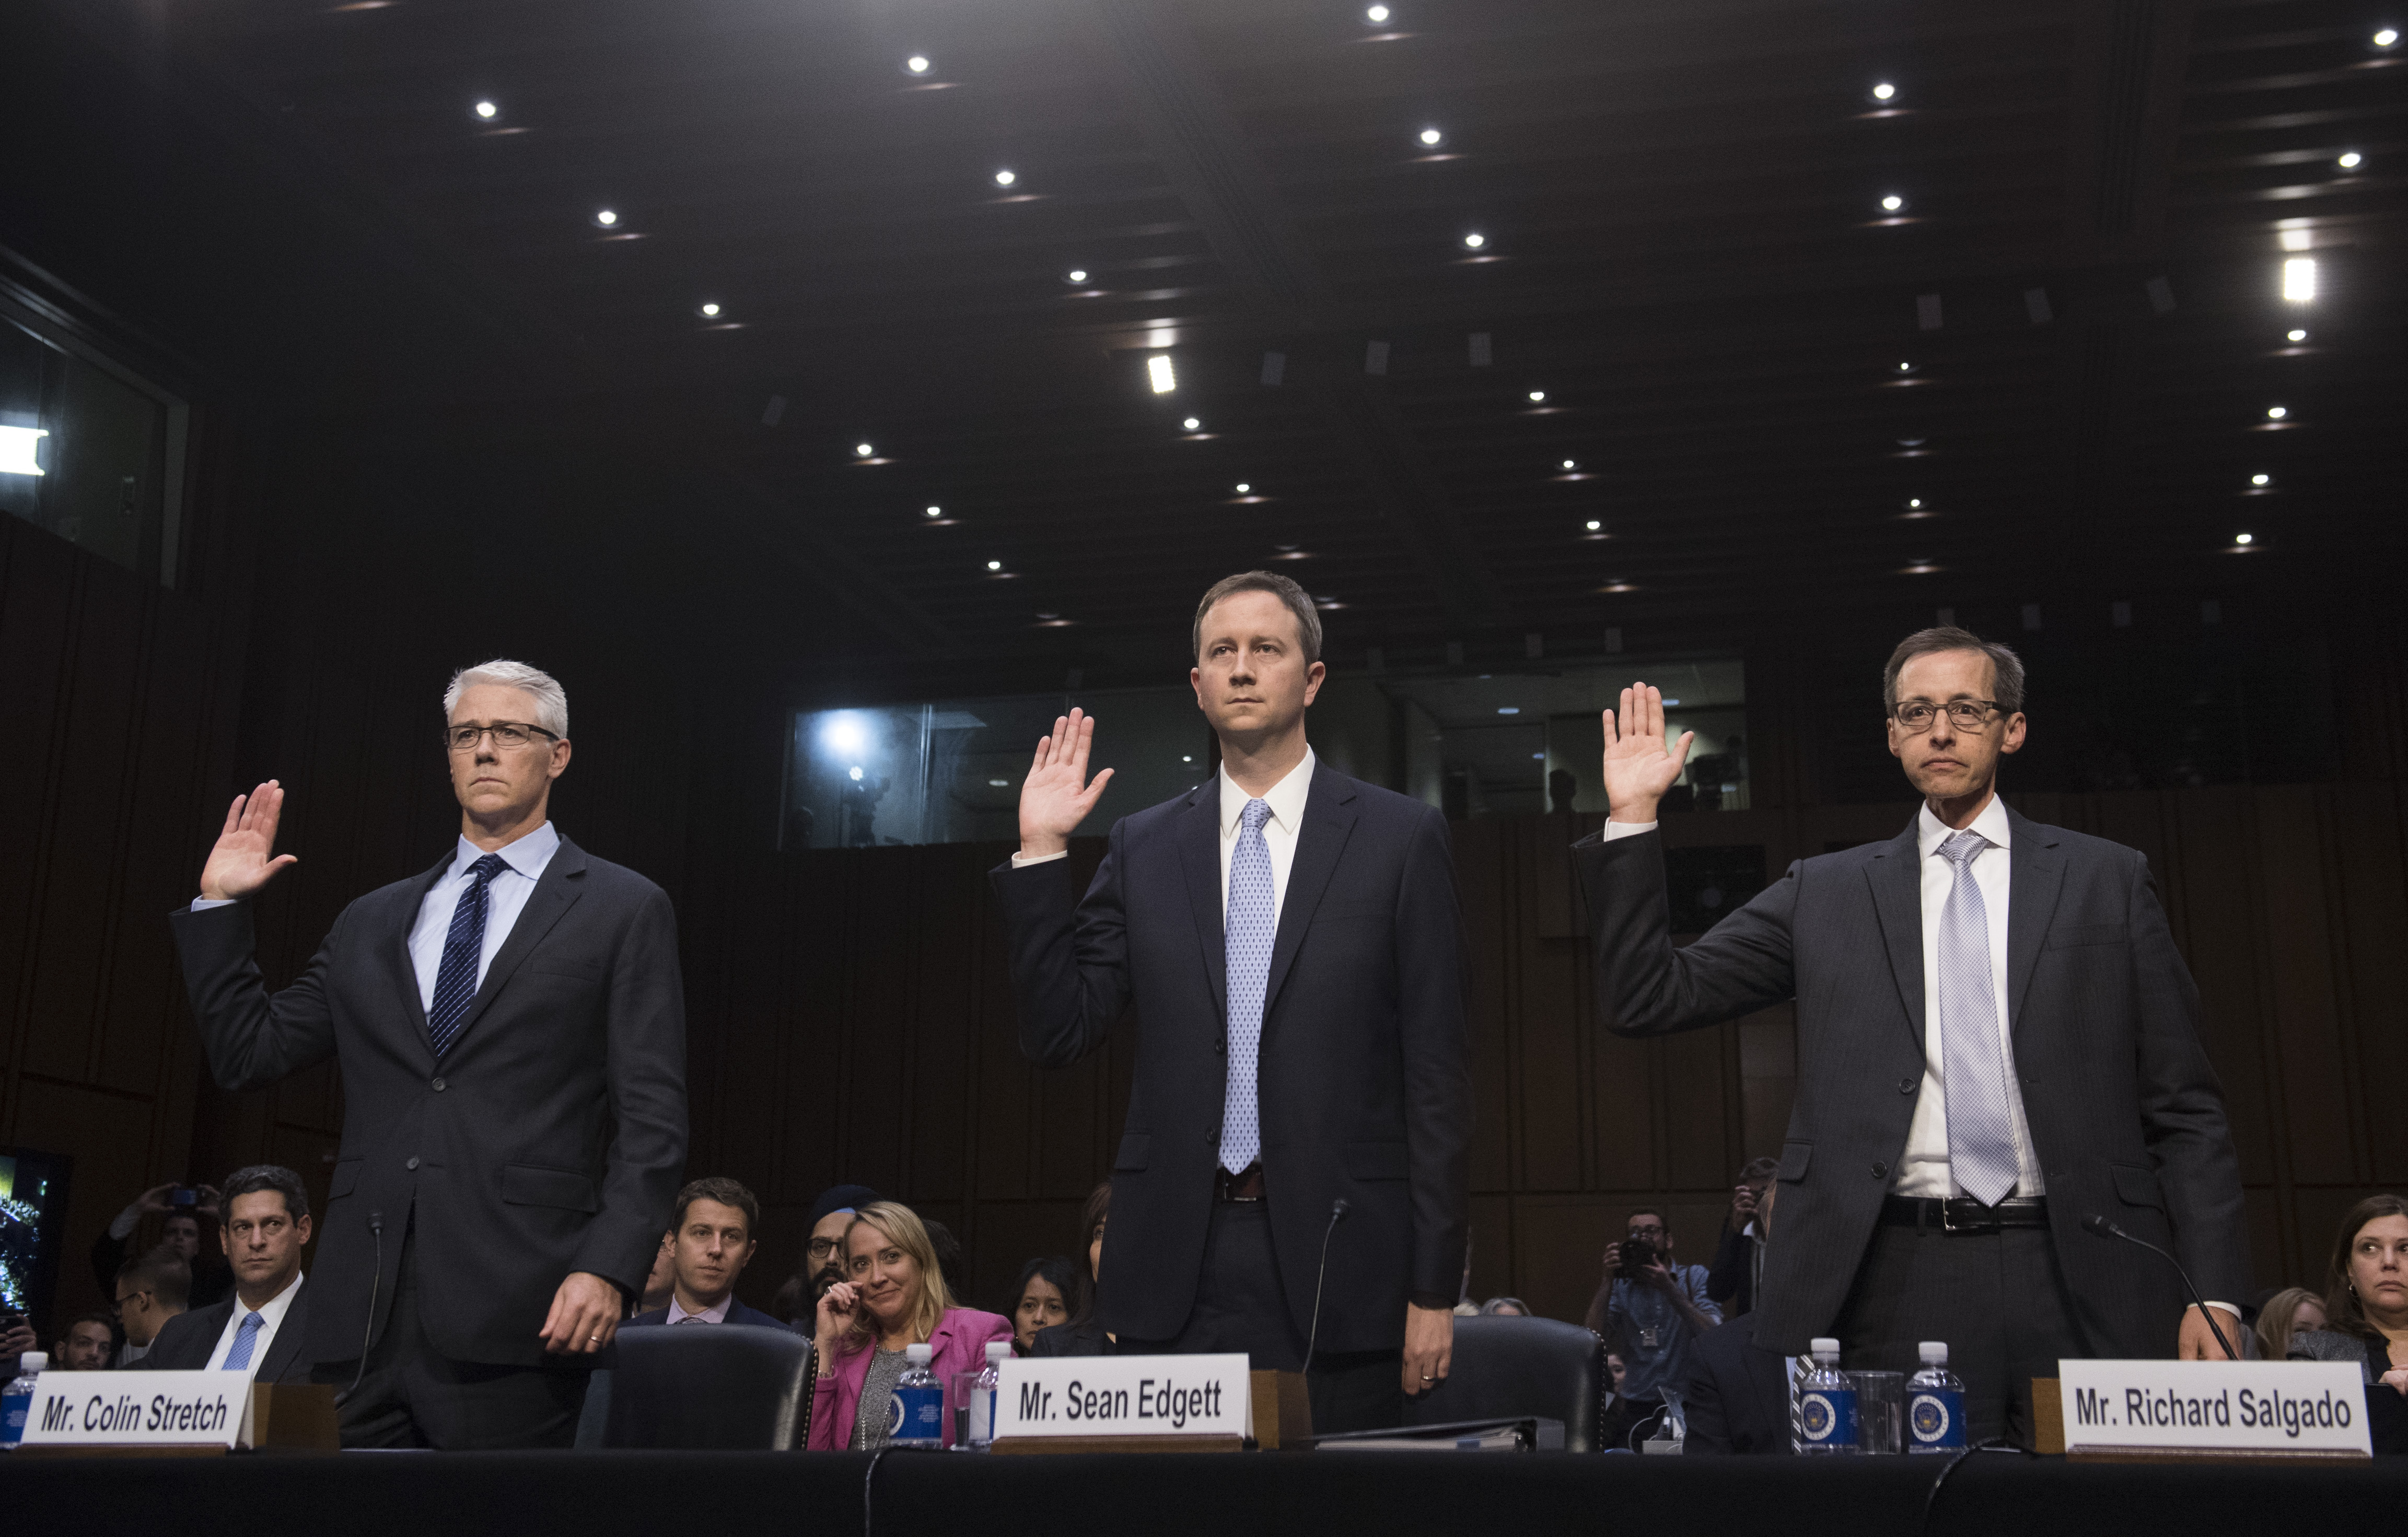 Colin Stretch (L), General Counsel of Facebook, Sean Edgett (C), Acting General Counsel of Twitter, and Richard Salgado (R), Director of Law Enforcement And Information Security of Google, are sworn in prior to testifying during a US Senate Judiciary Subcommittee on Crime and Terrorism hearing on Russian influence on social networks on Capitol Hill in Washington, DC, October 31, 2017. (Saul Loeb—AFP/Getty Images)